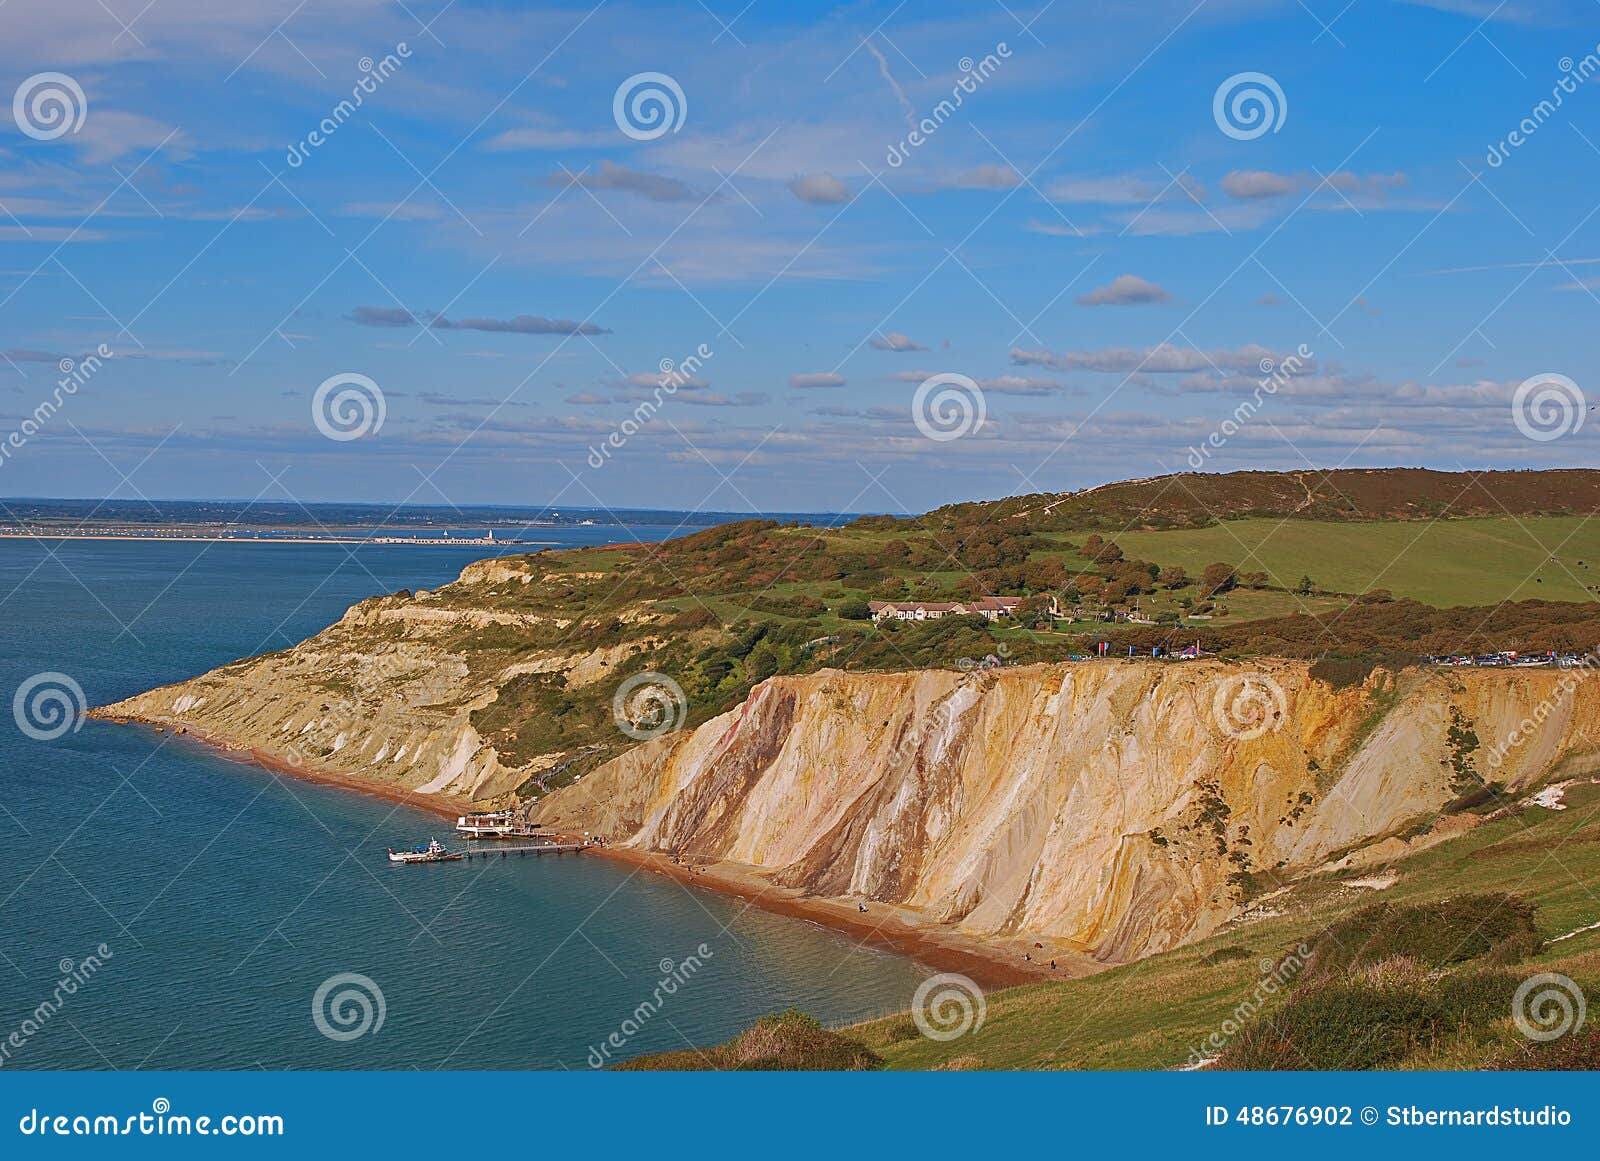 alum bay with her popular coloured sand with pier and chairlift station